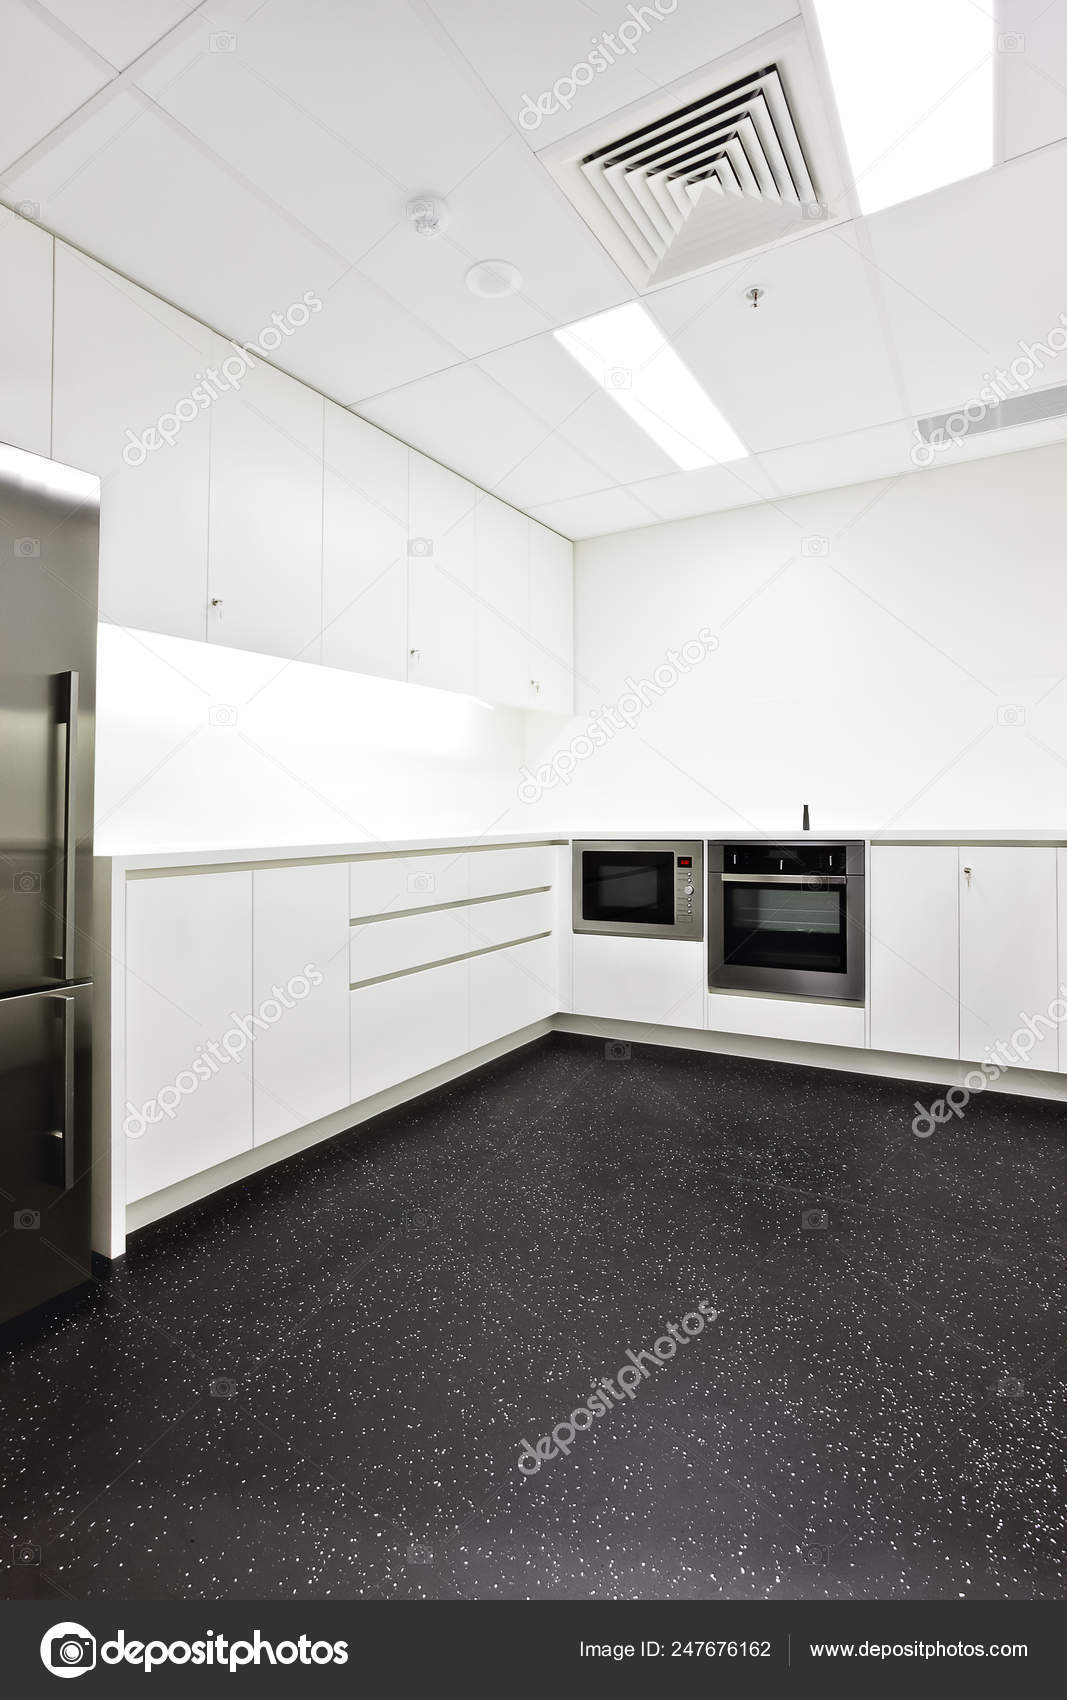 Modern Kitchen With White Walls And Black Floor Tiles Stock Photo